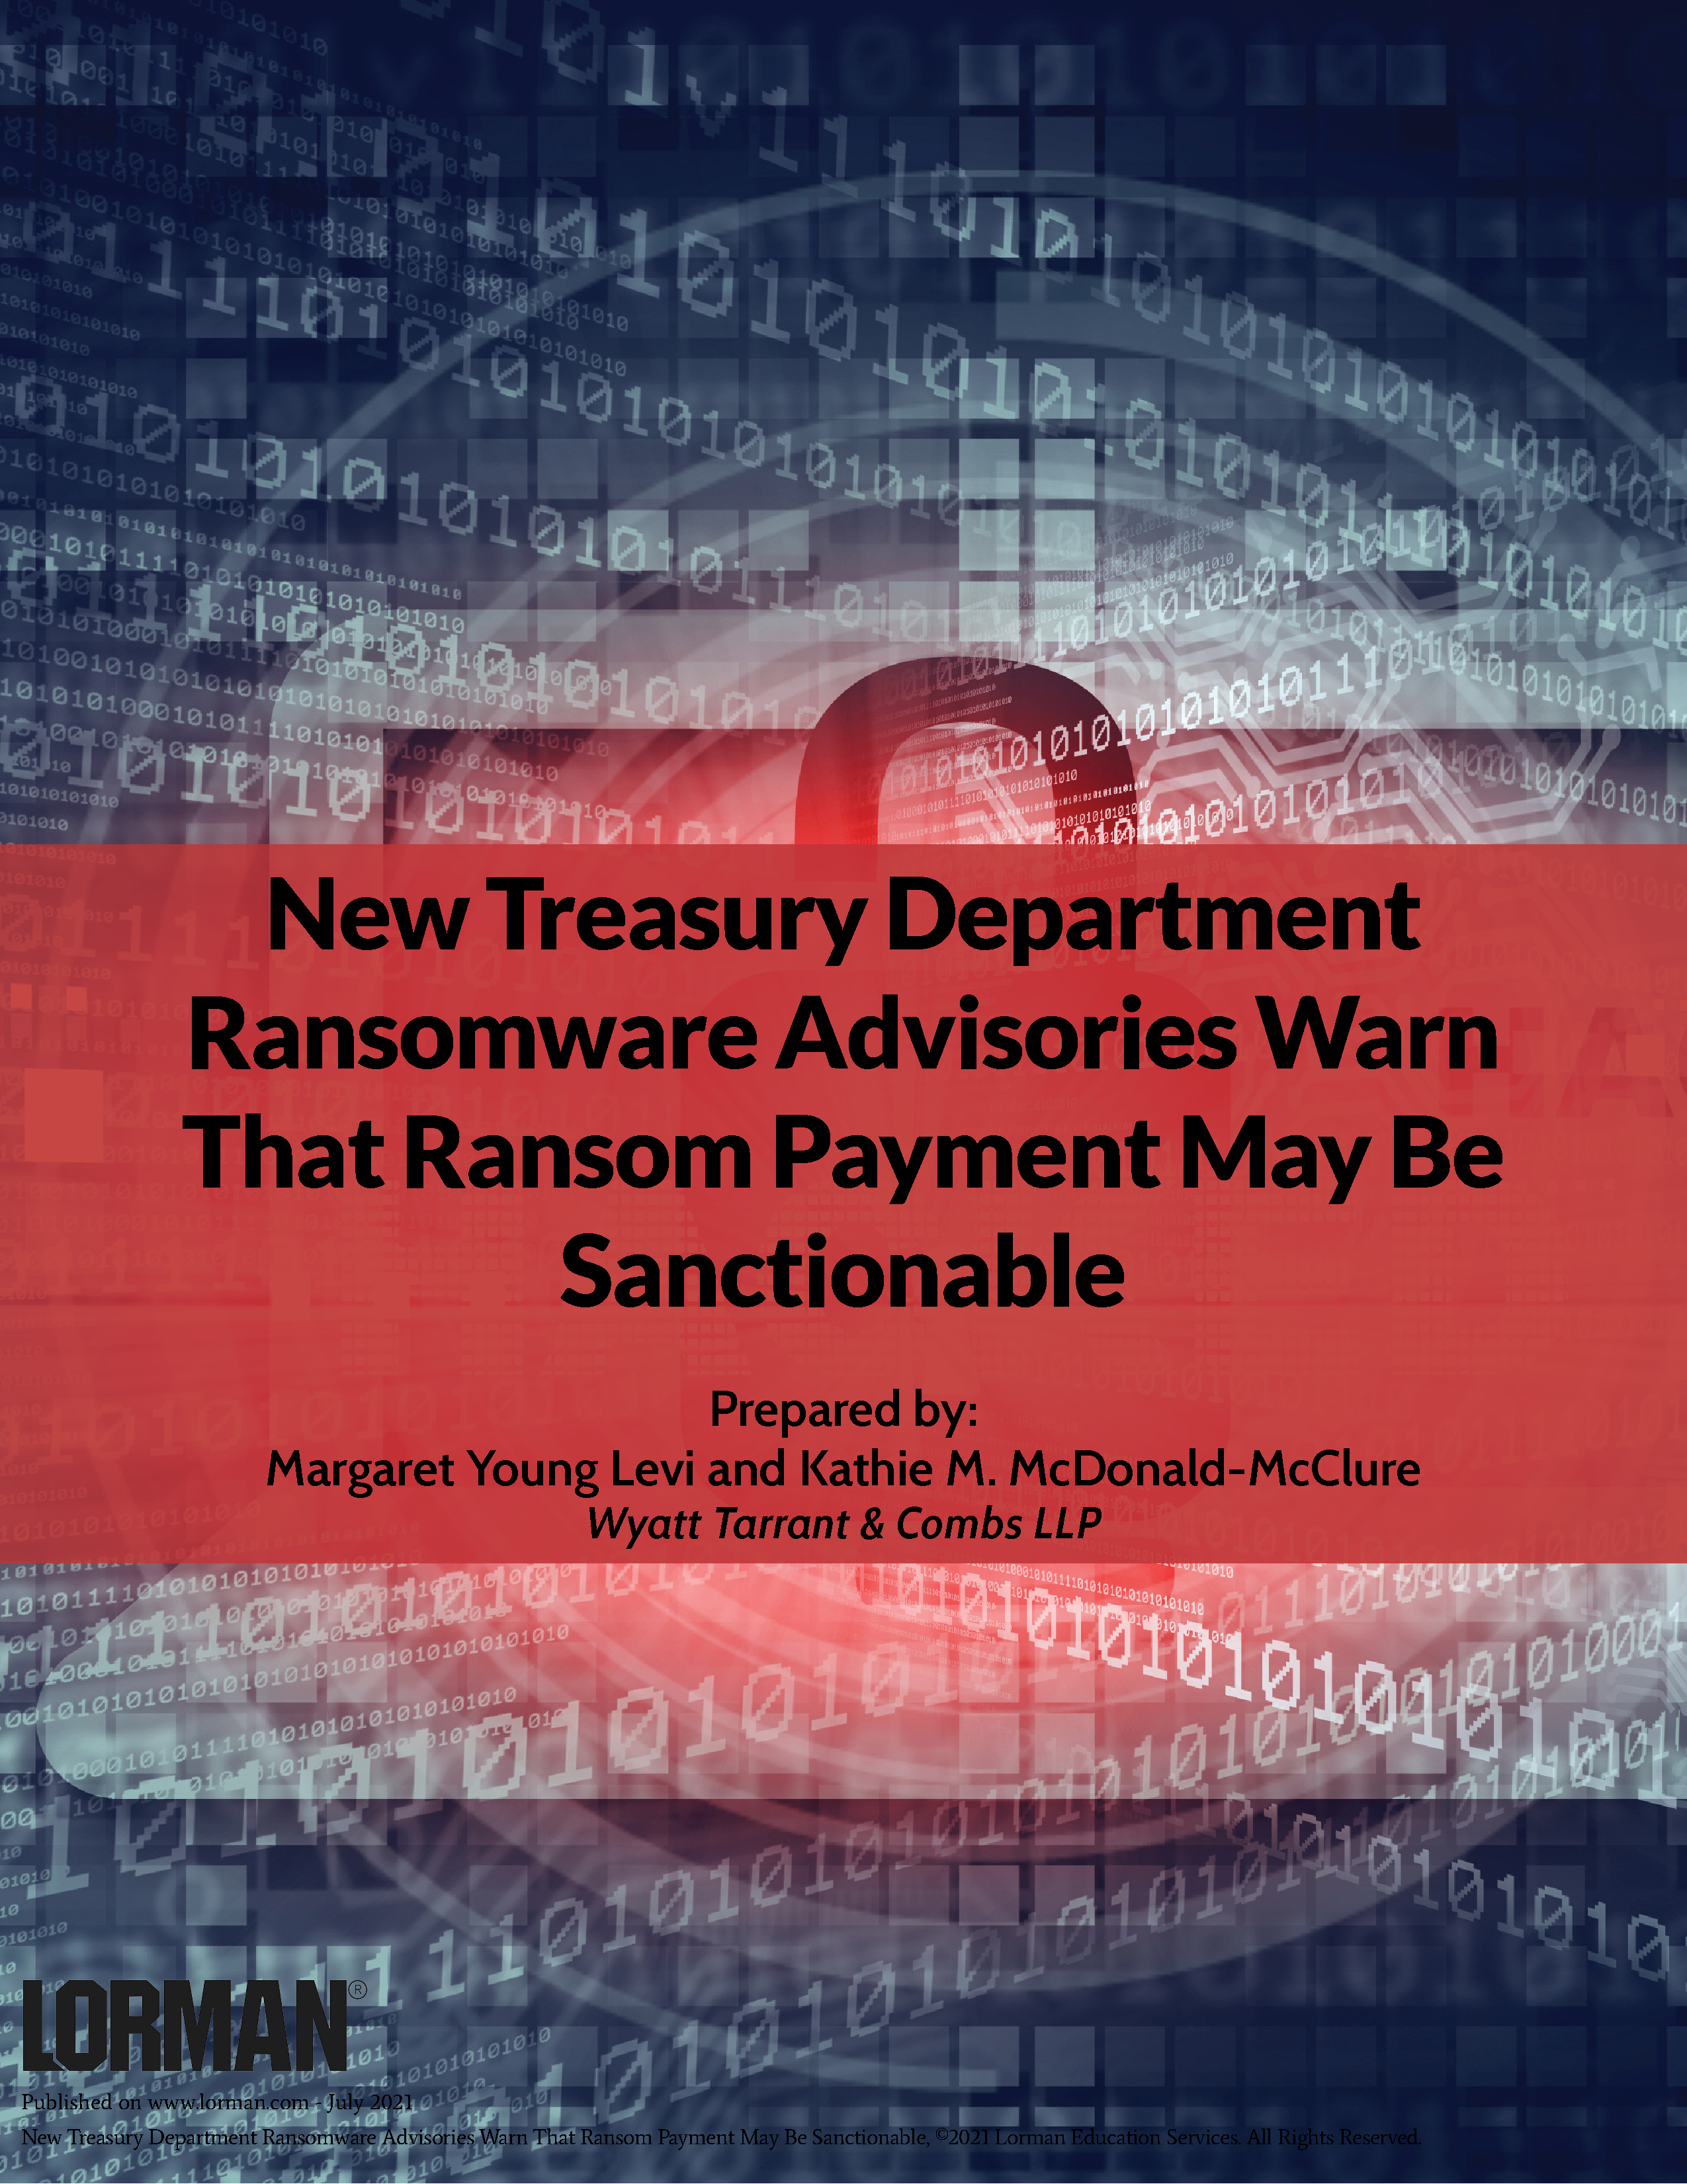 Treasury Department Ransomware Advisories Warn that Ransom Payment May be Sanctionable